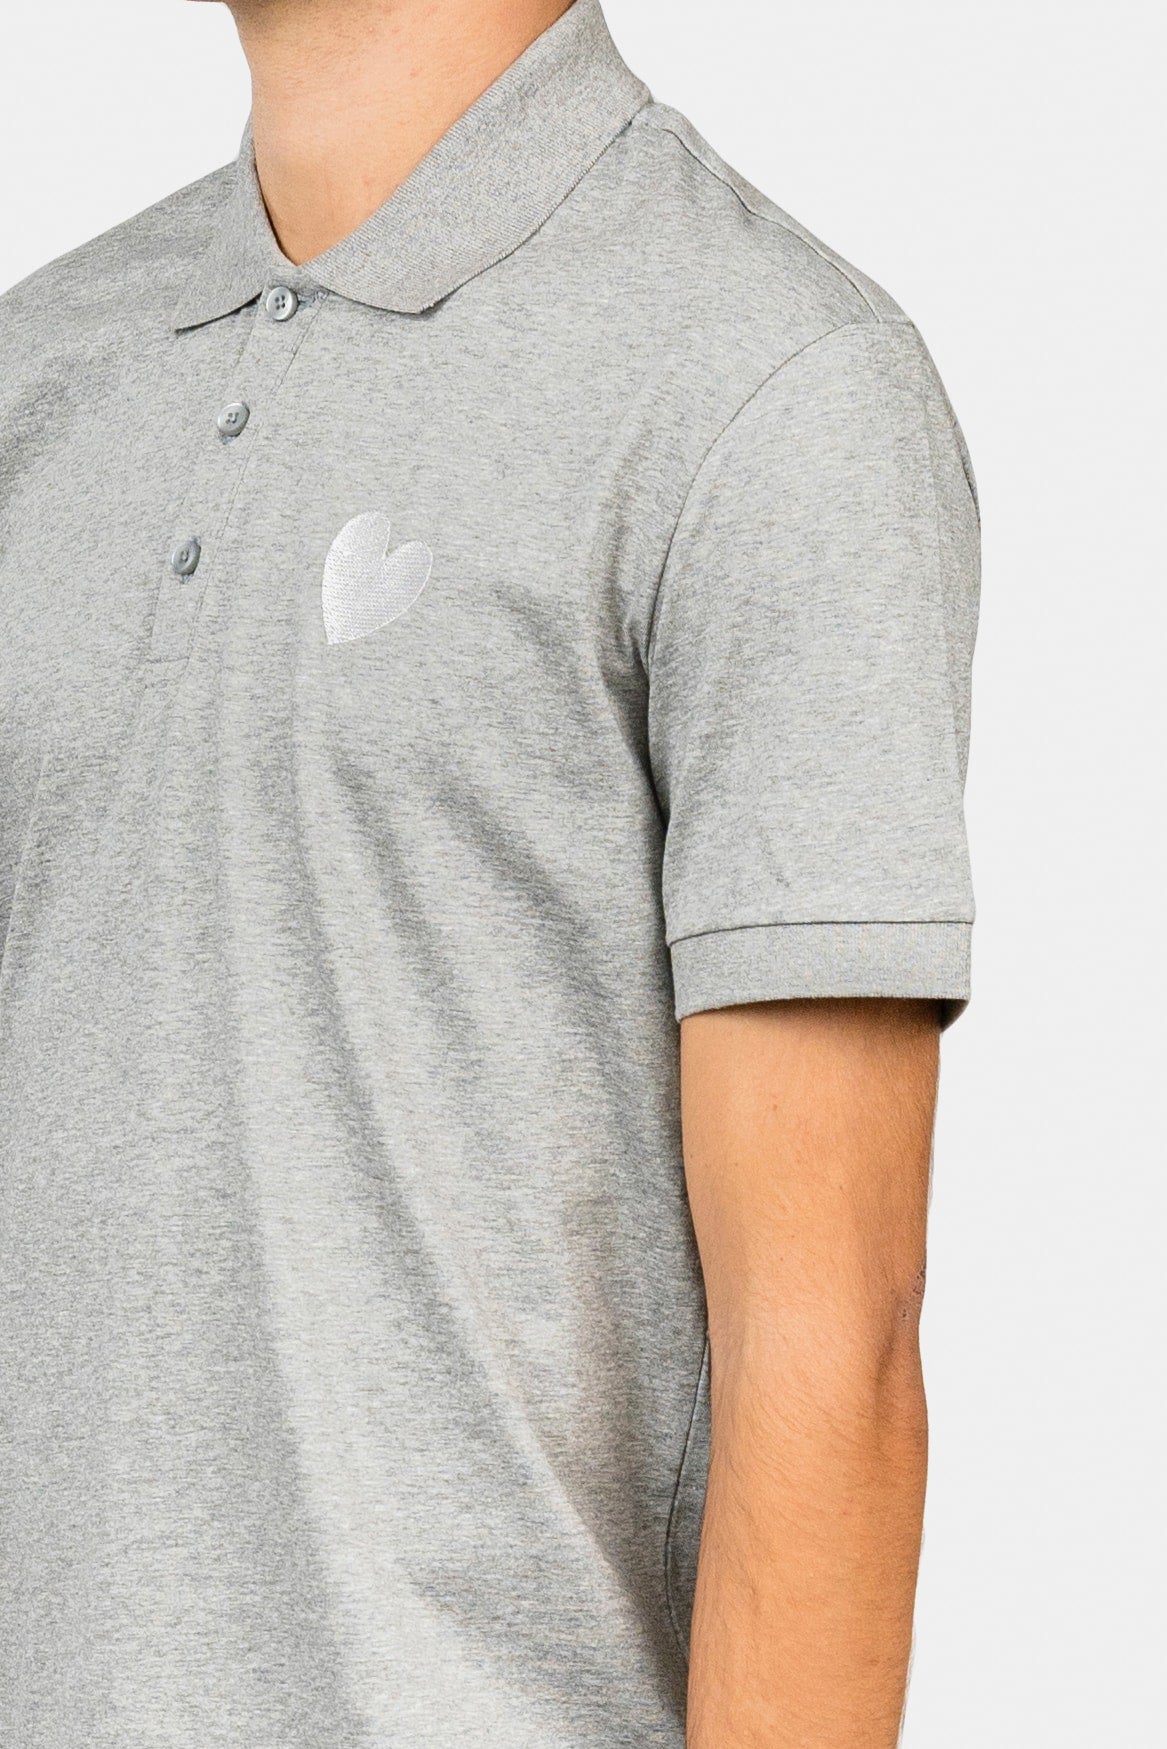 Classic Embroidery Heart Jersey Gray Polo